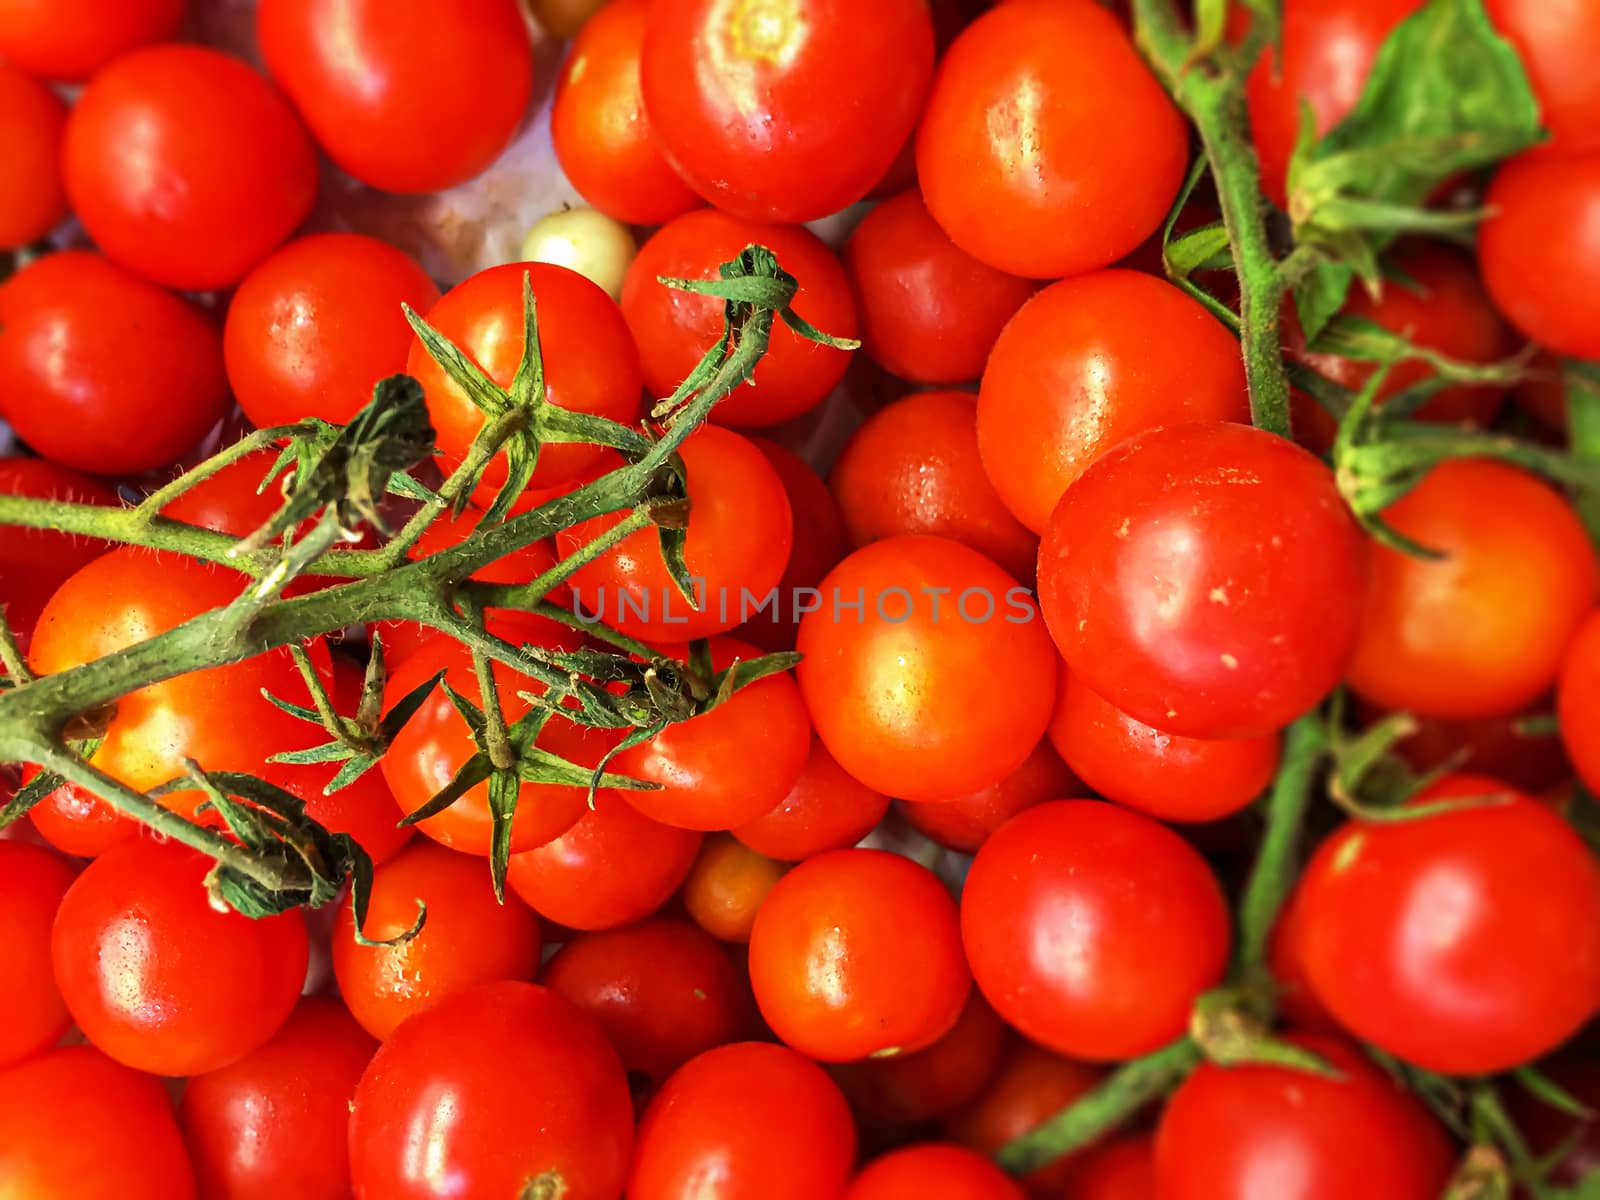 top view of a group of cherry tomatoes. Cherry tomatoes come from the Pachino area in Sicily, Italy